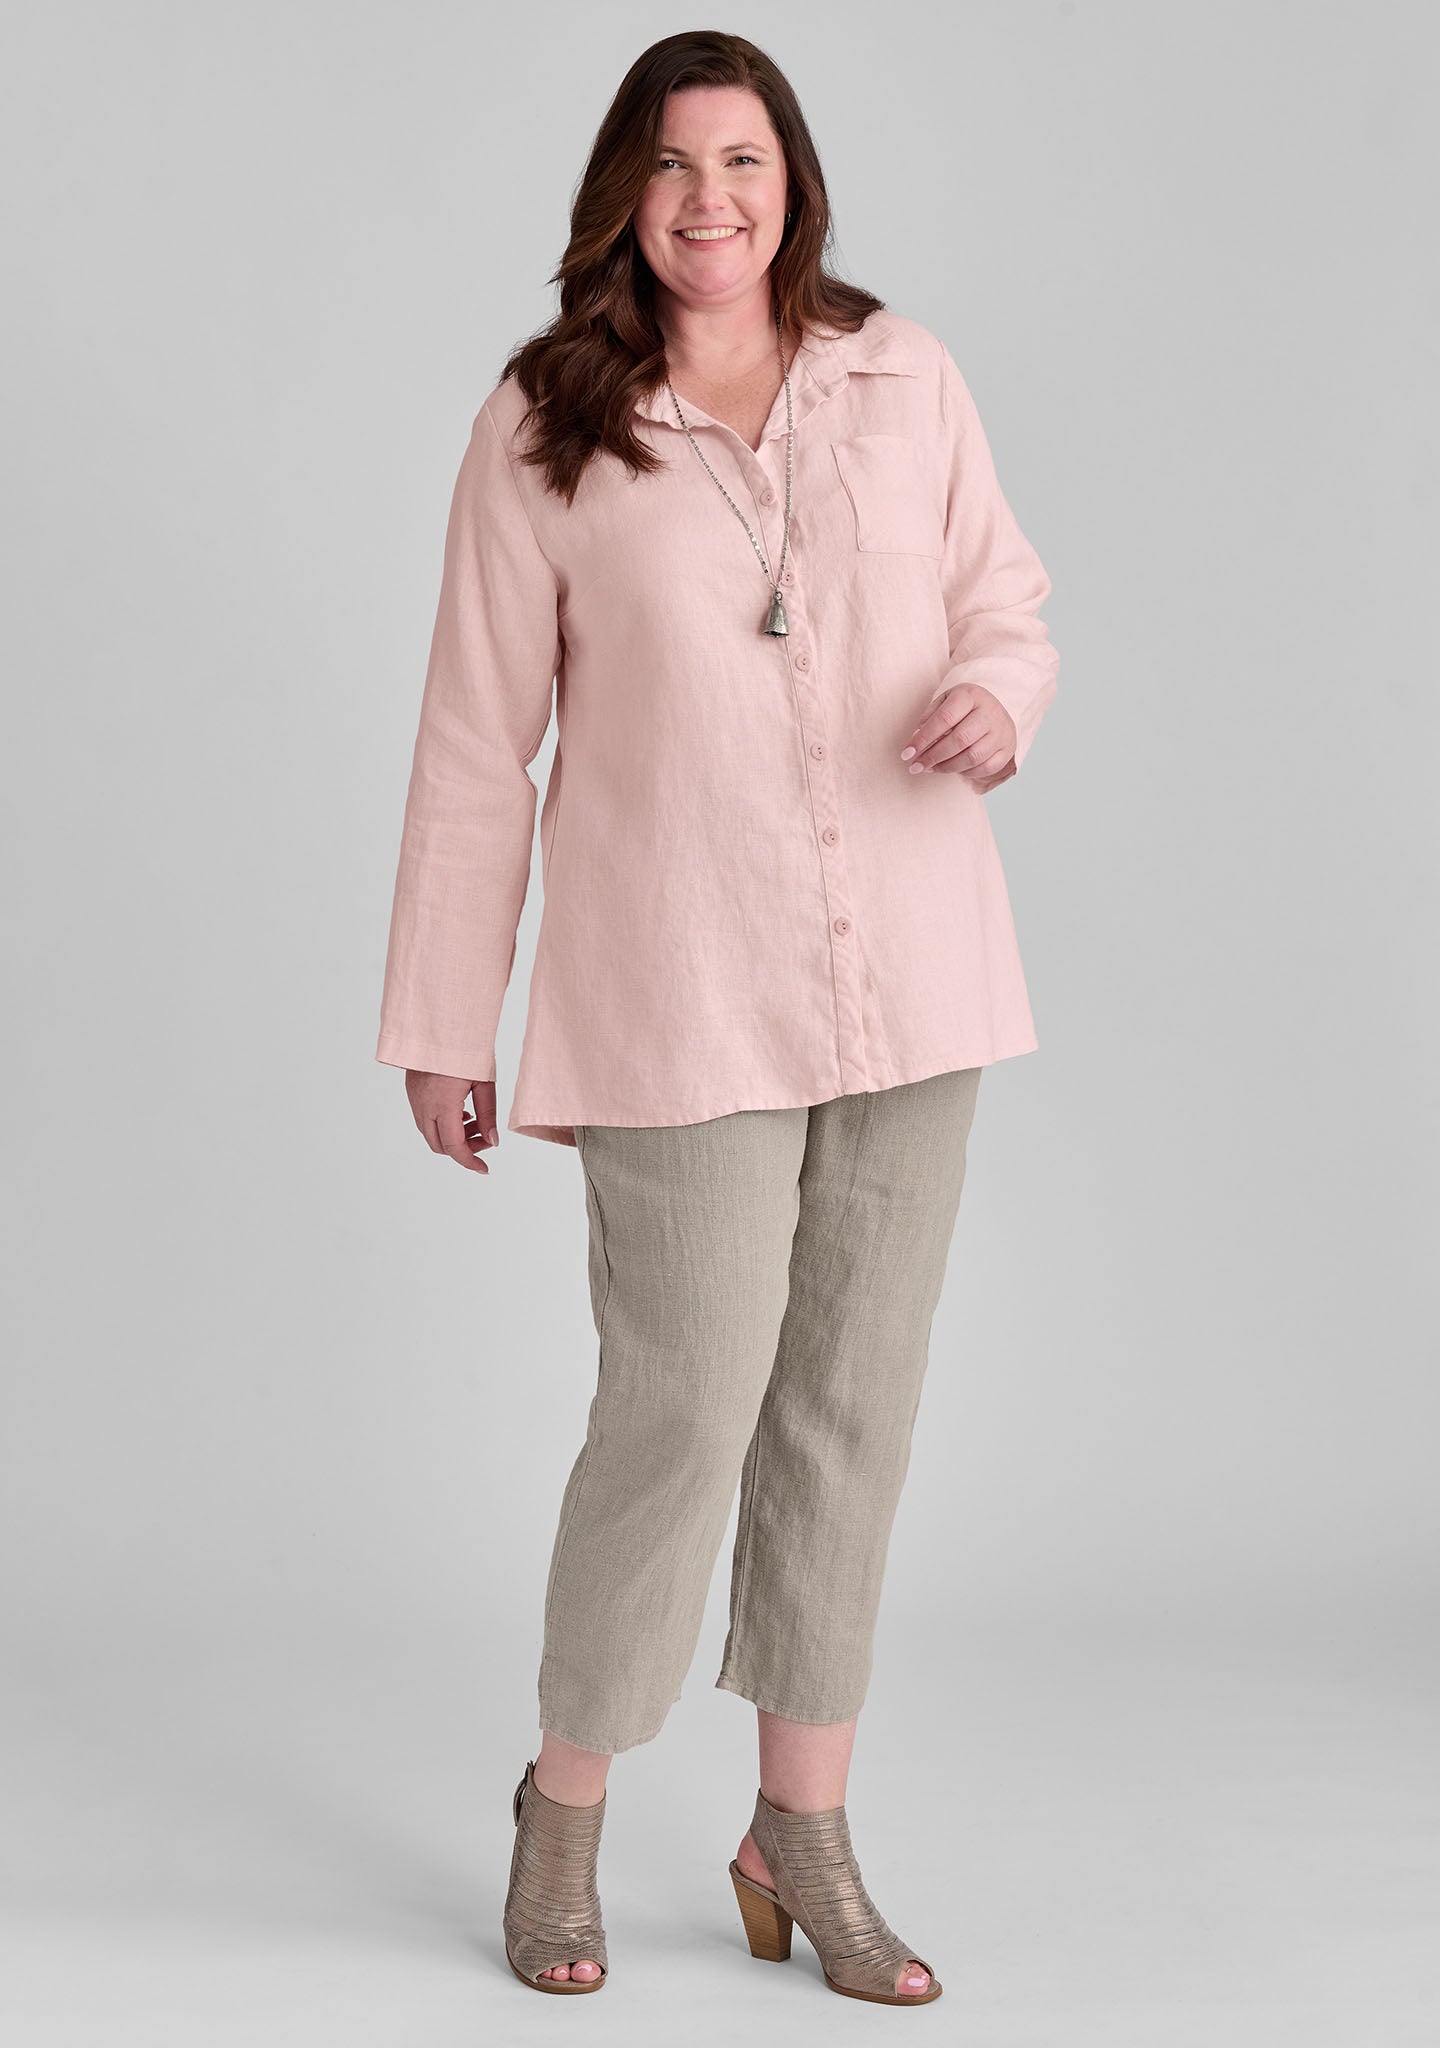 FLAX linen shirt in pink with linen pants in natural